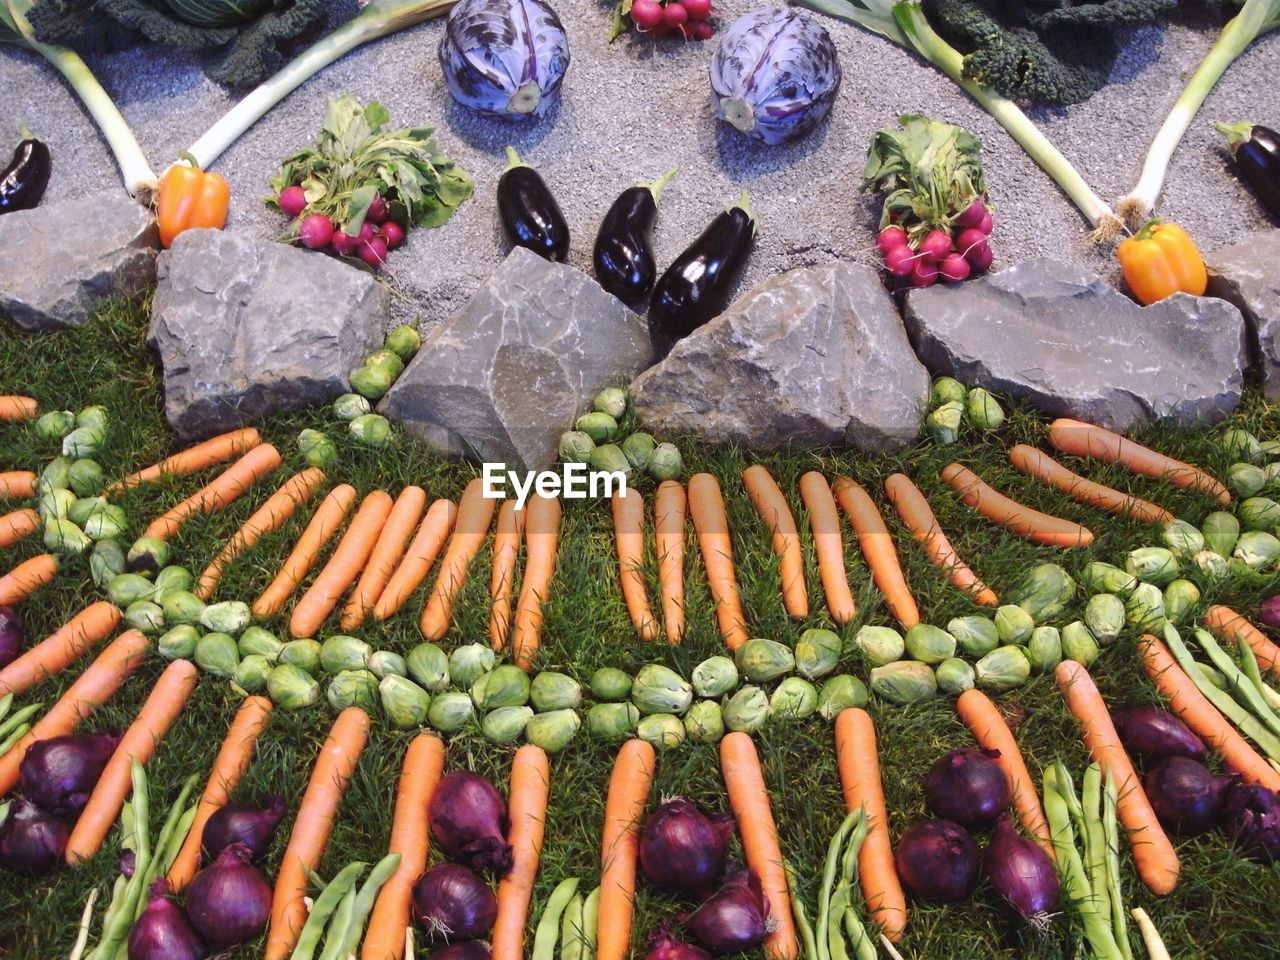 CLOSE-UP VIEW OF VEGETABLES